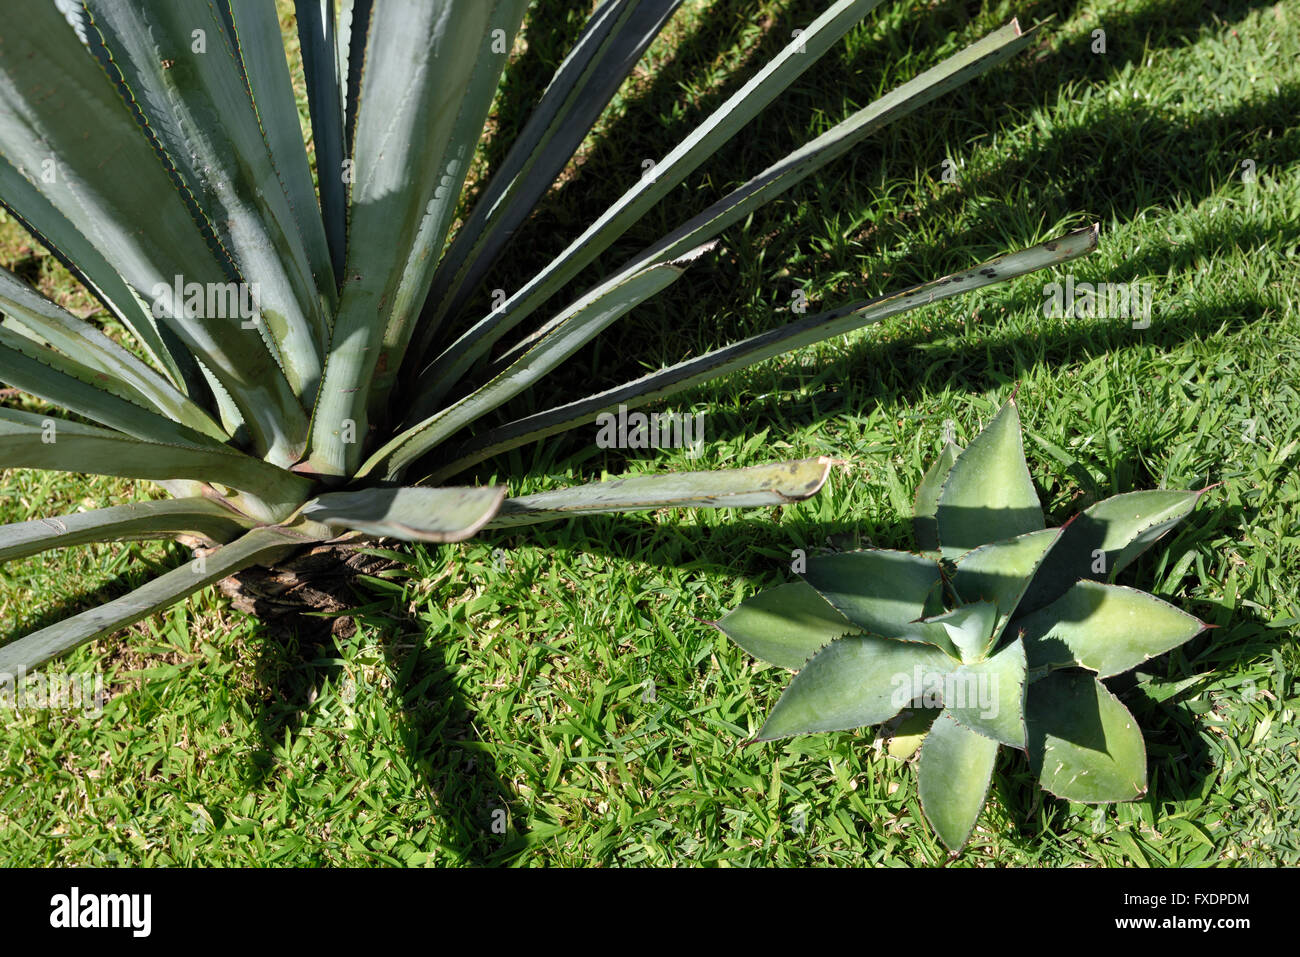 Young blue agave plants growing among lawn grass at a tequila plant Mexico Stock Photo